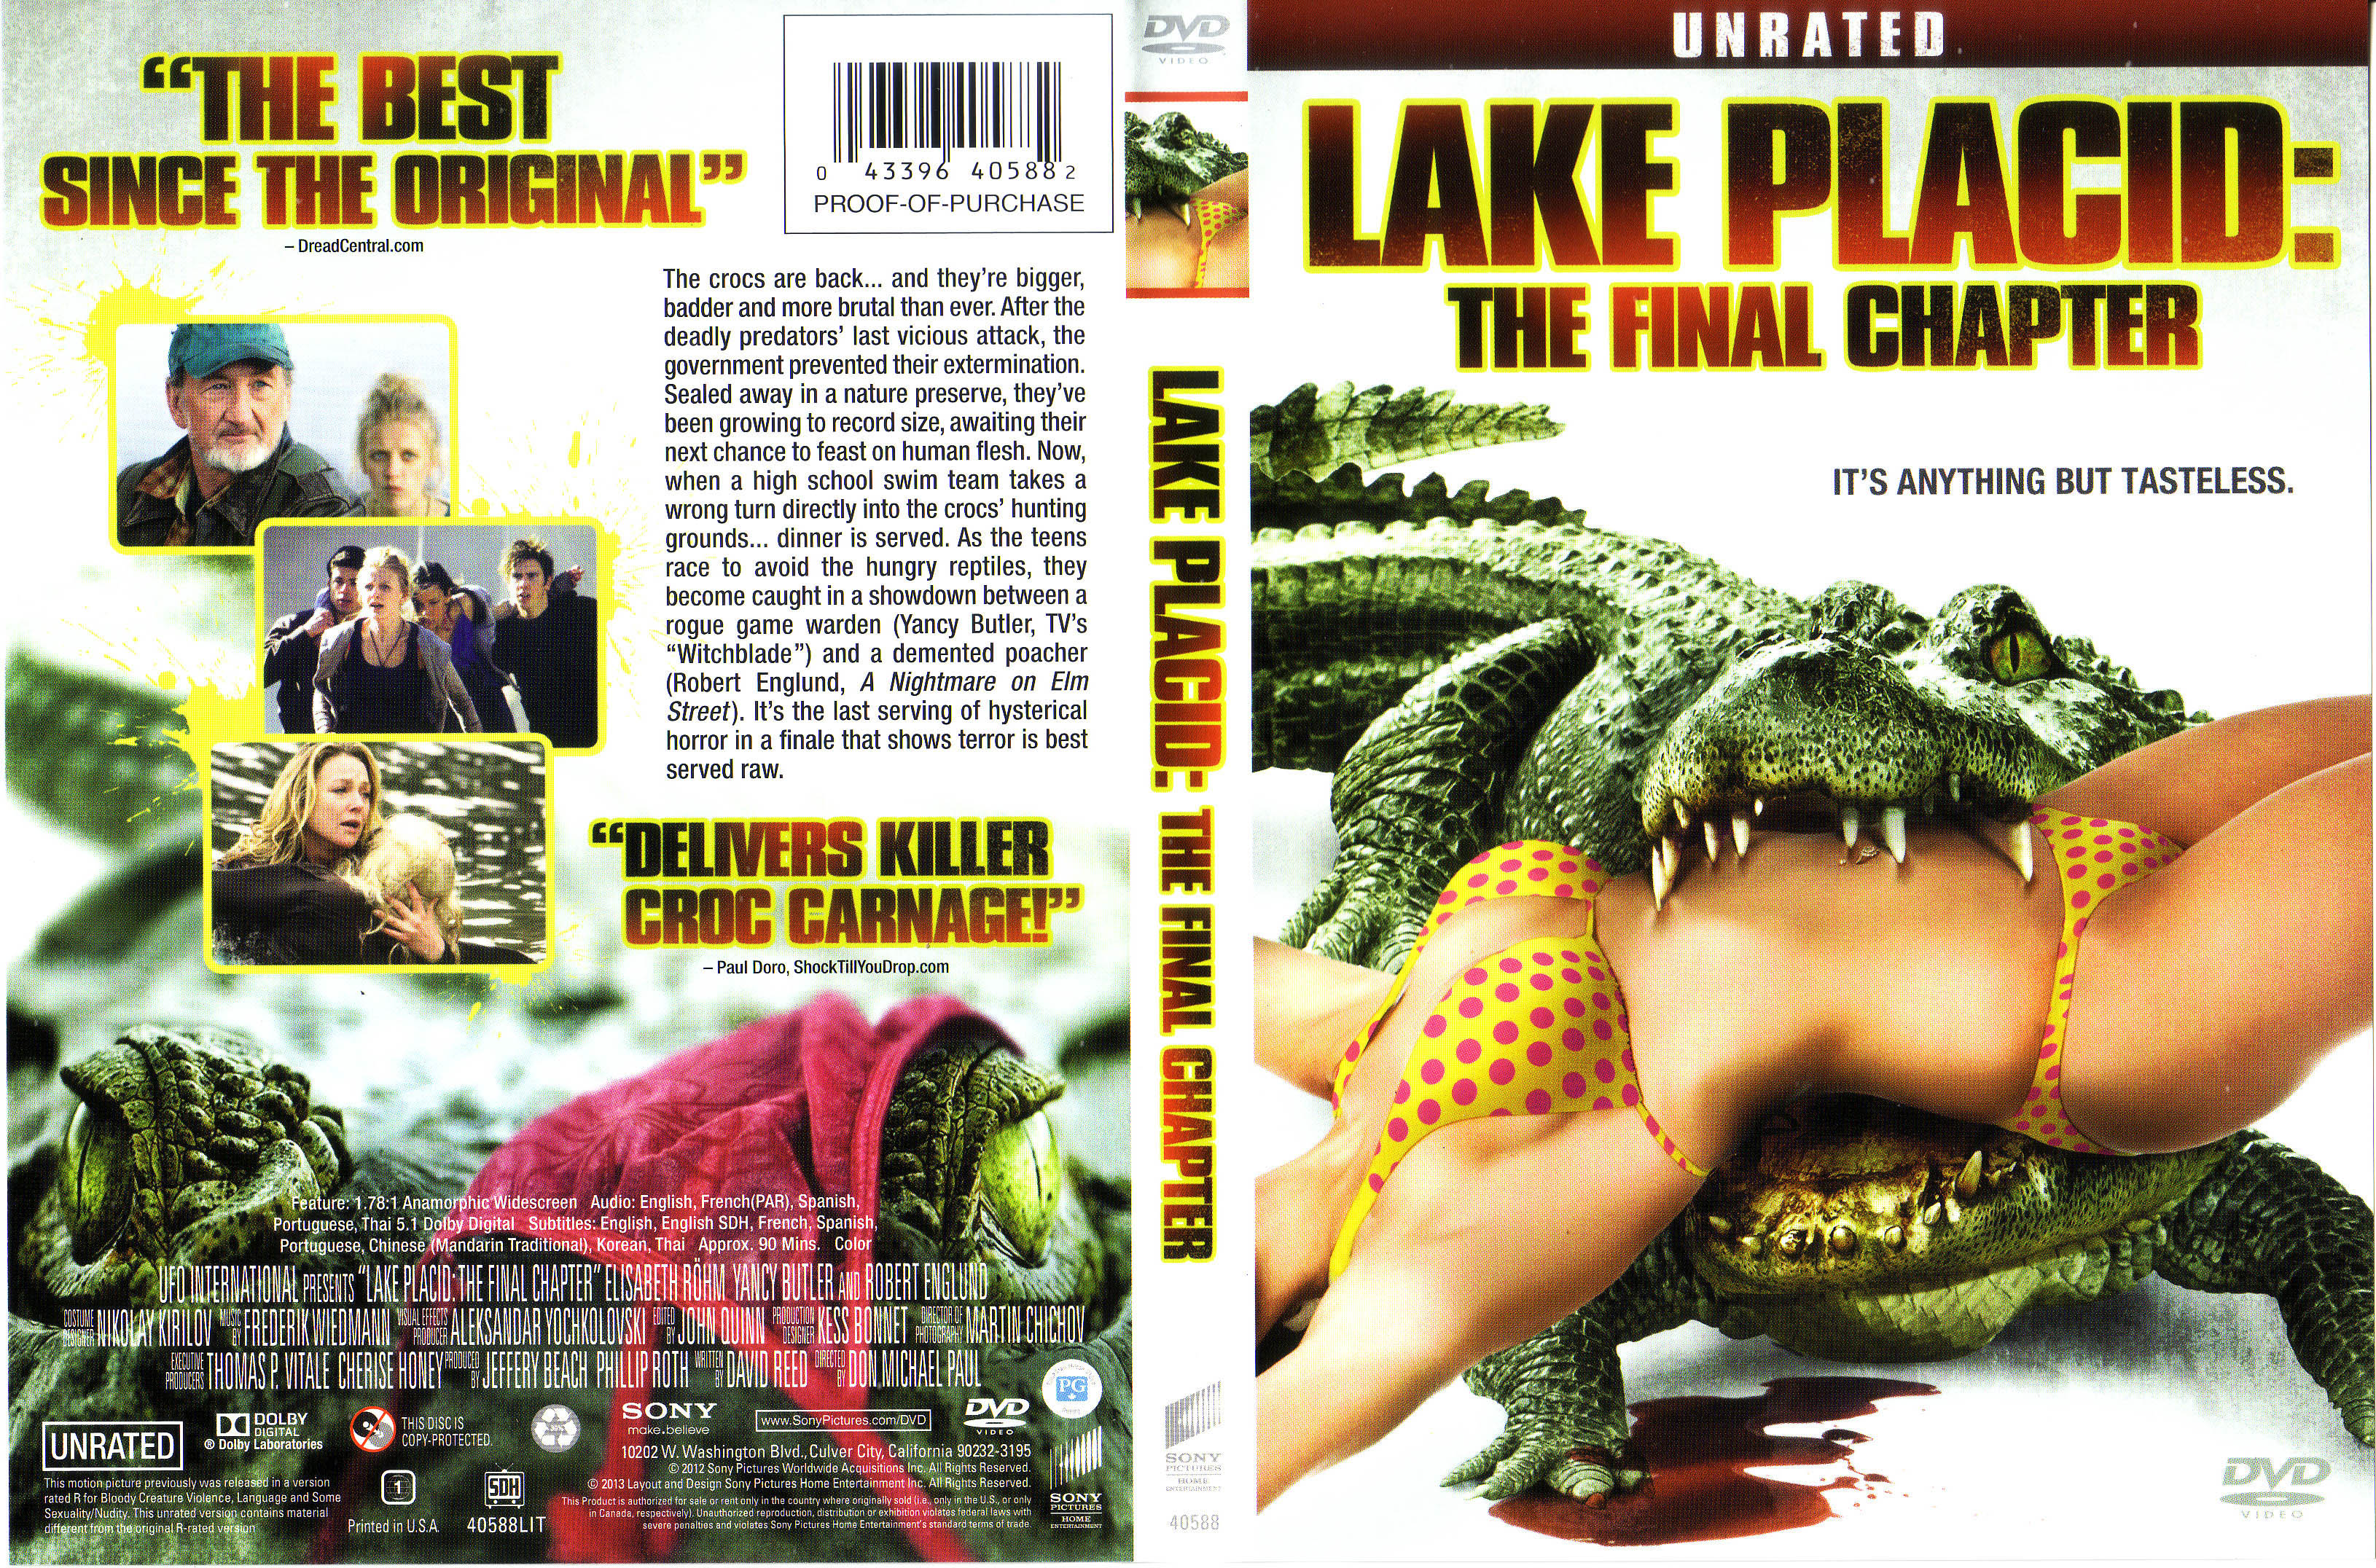 Lake placid the final chapter cast